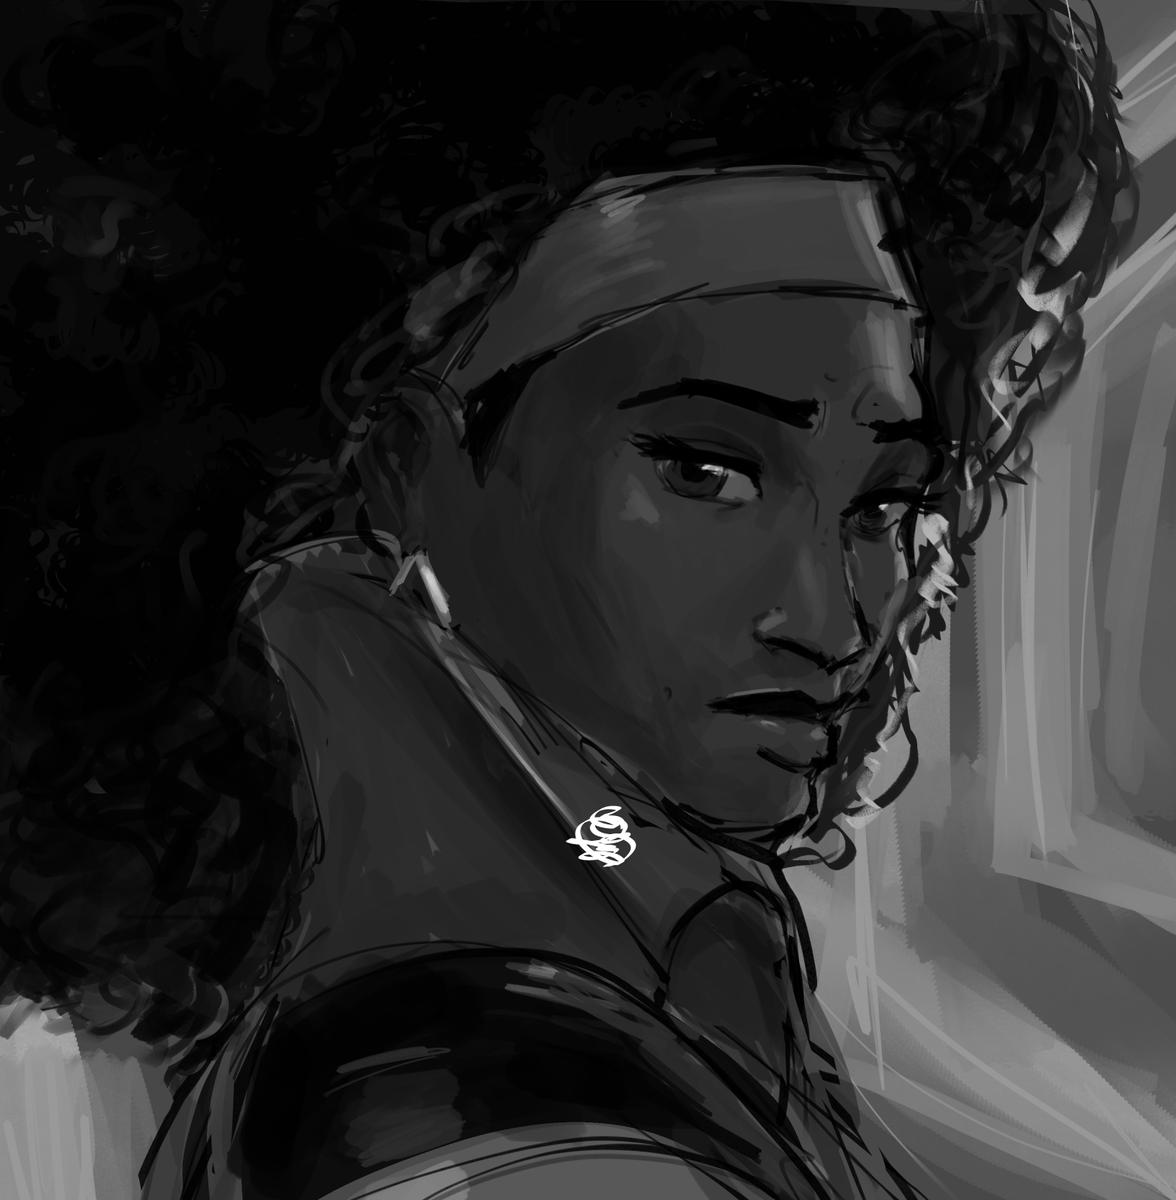 Screencap value study (Lord did that hair give me trouble😭) #Atsv #JessicaDrew #Spiderverse